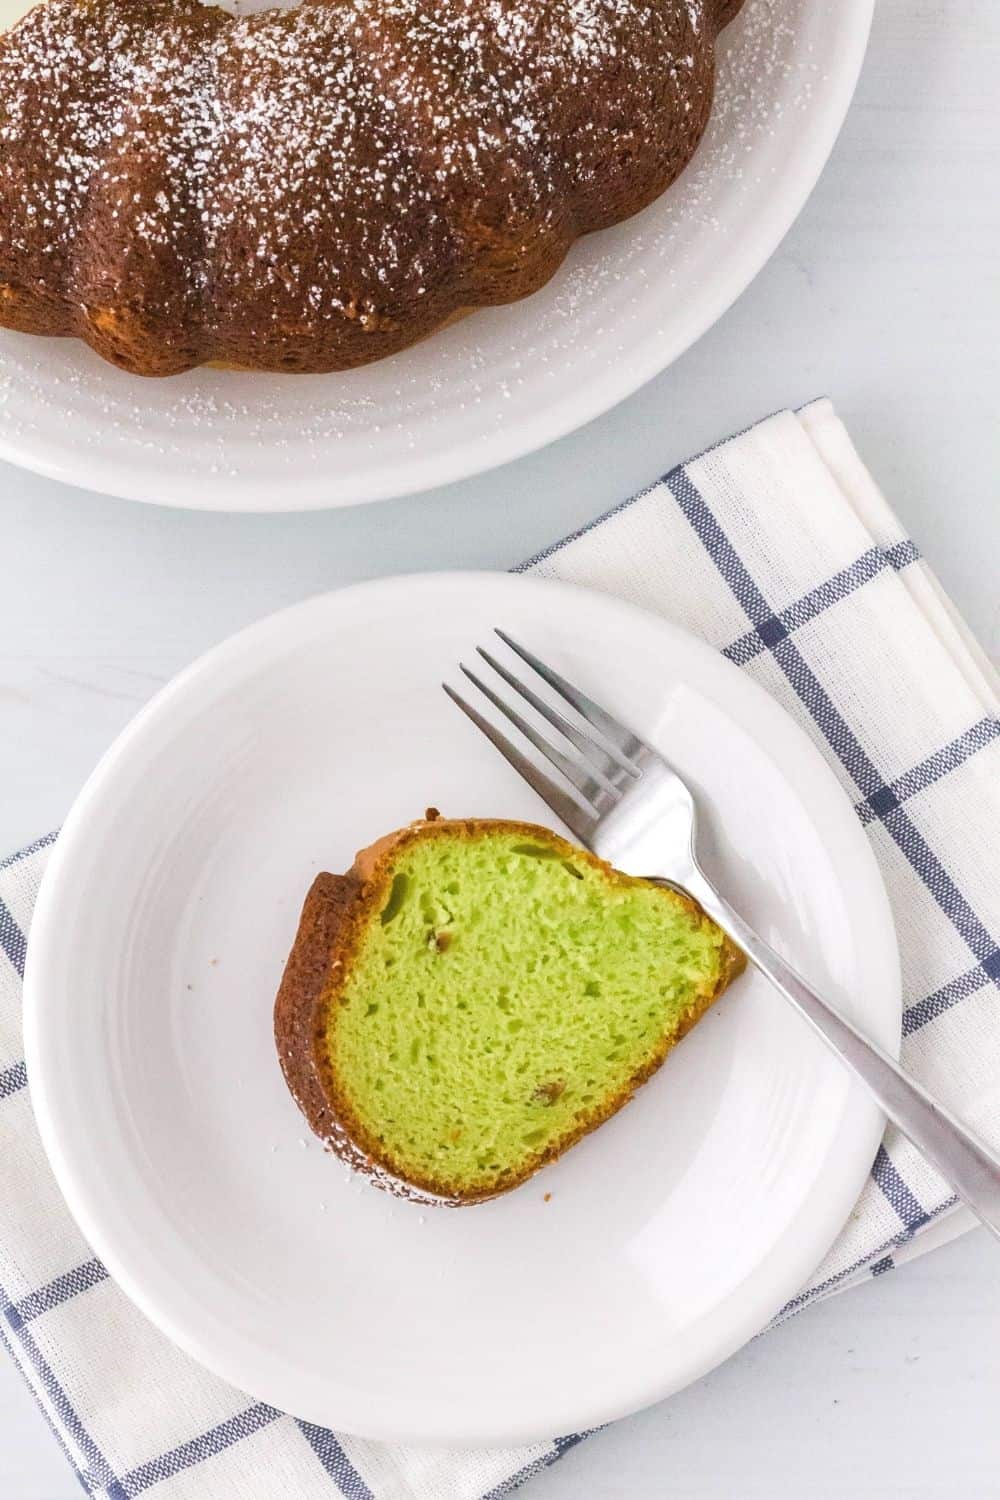 overhead view of a slice of pistachio cake made from a mix, served on a white plate with a fork. The plate is resting on a blue and white napkin, and the remainder of the whole cake is in the background.